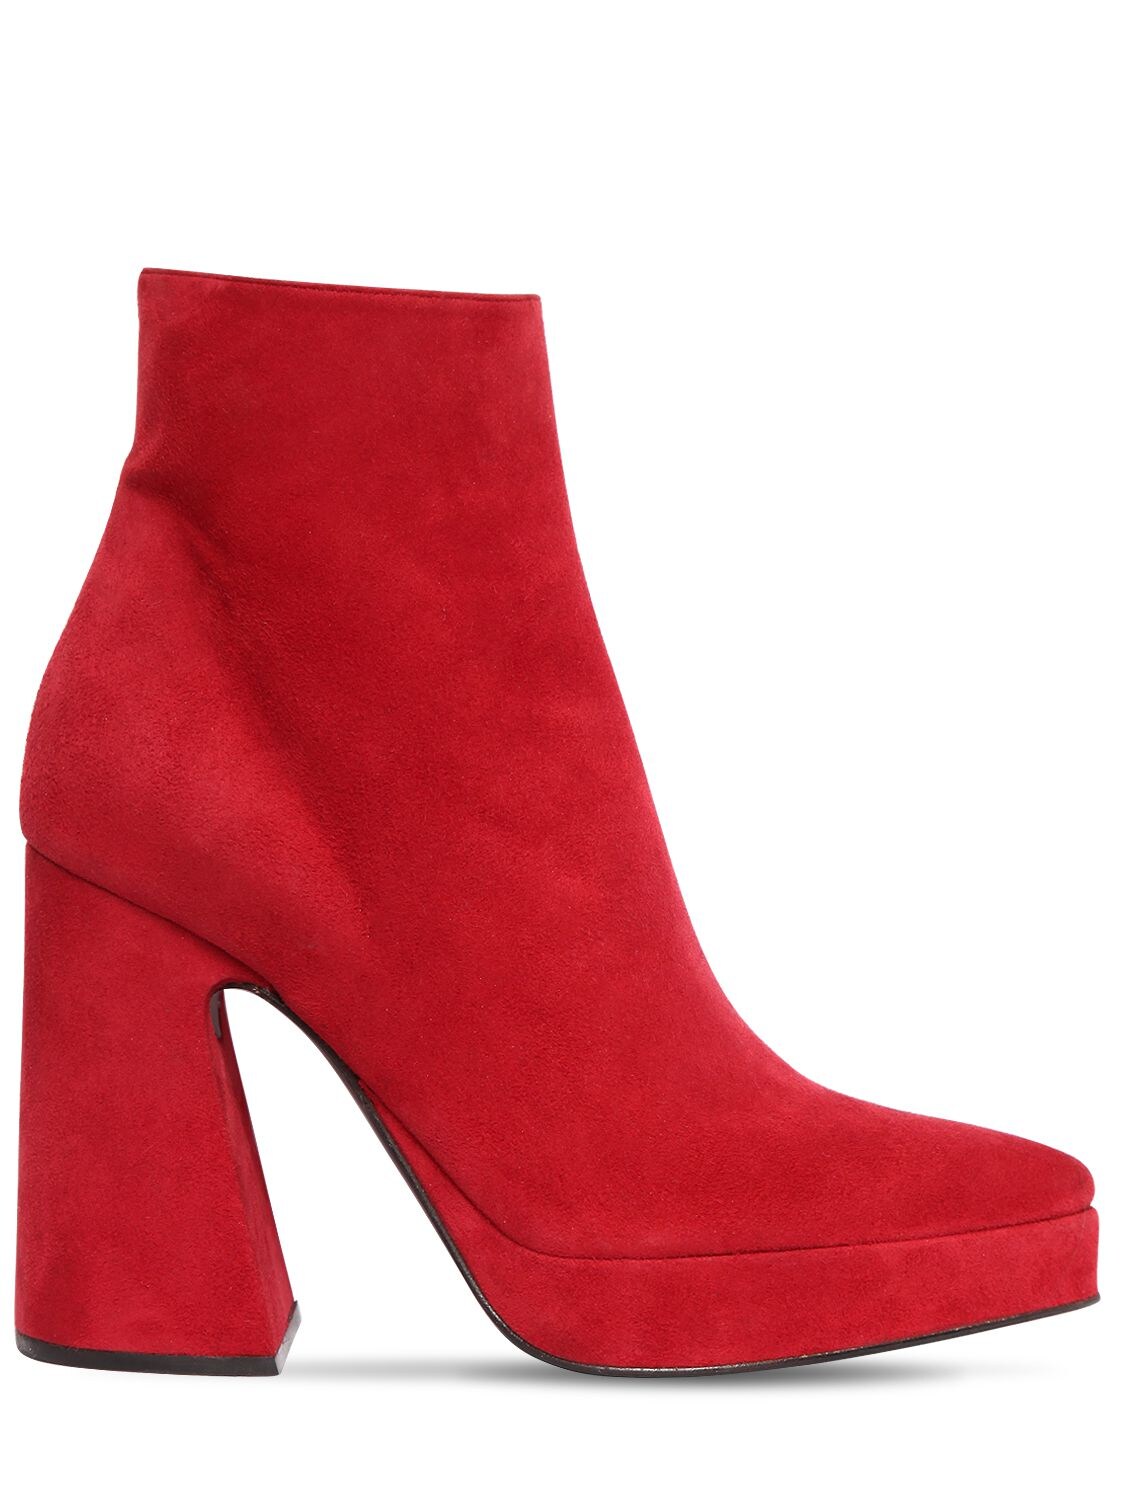 Proenza Schouler 105mm Suede Platform Ankle Boots In Red